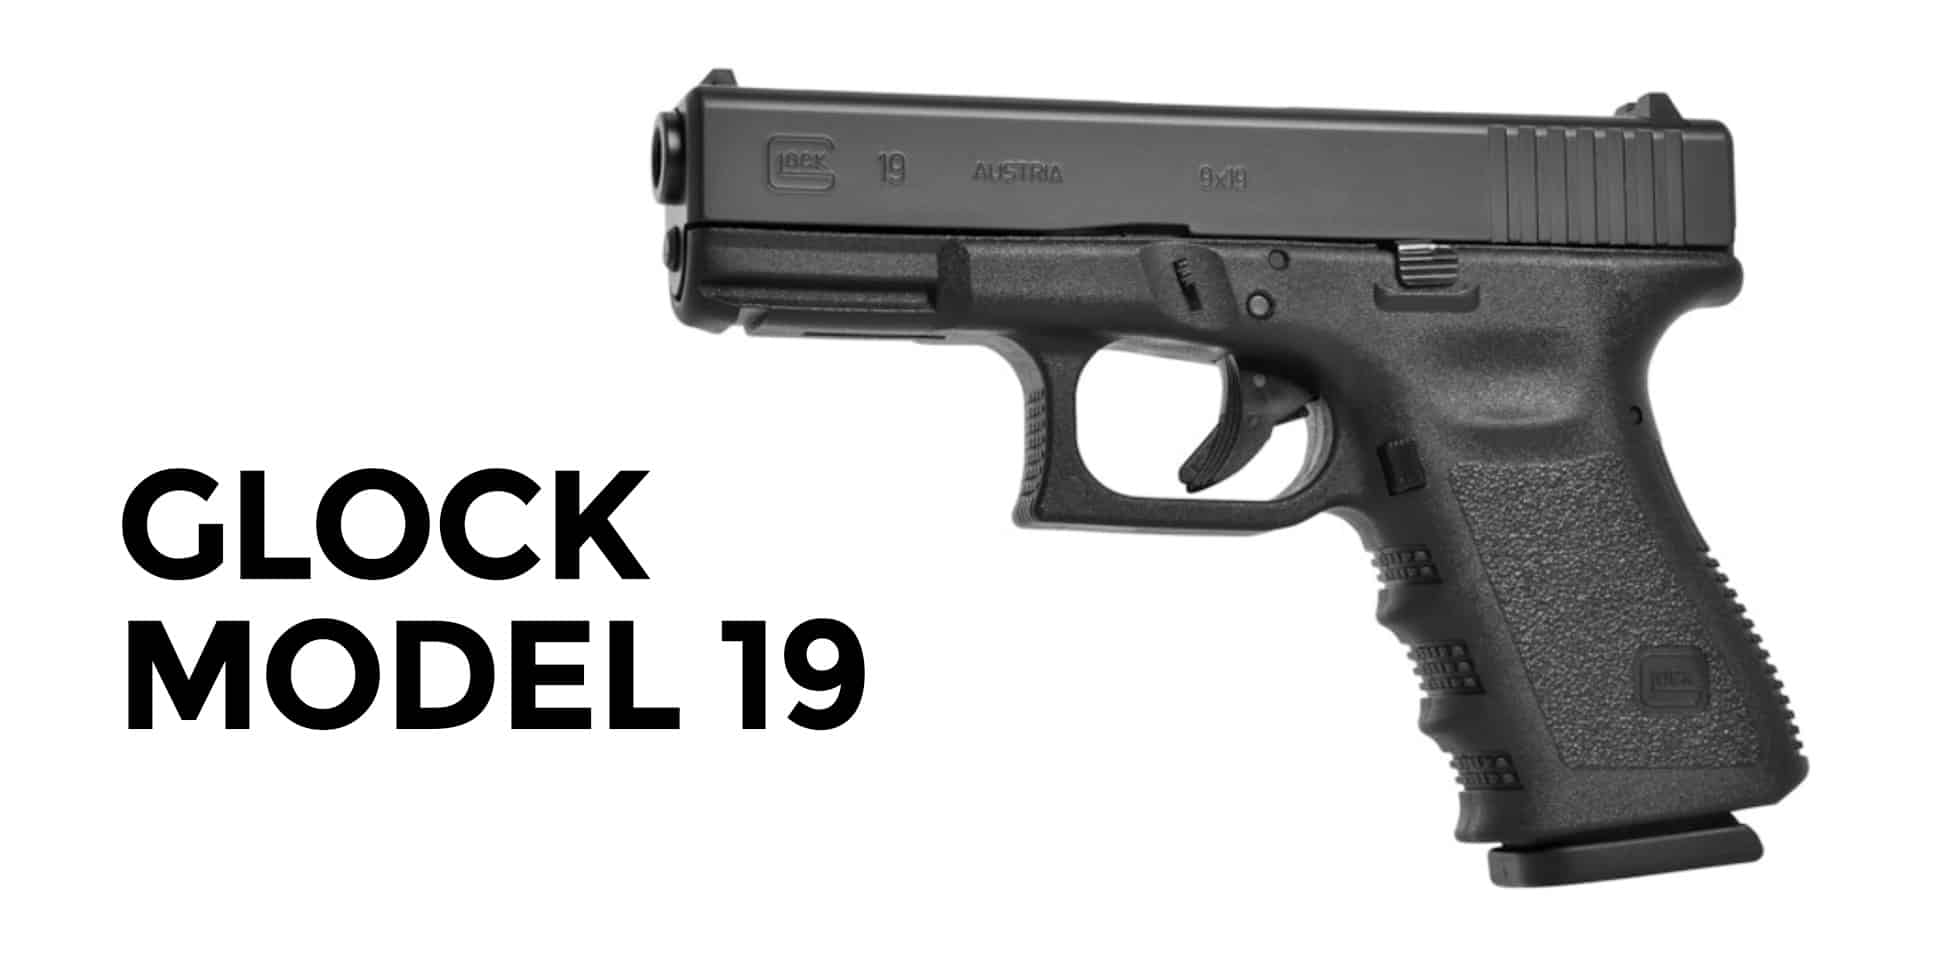 A Glock 19 is one of the best values in guns